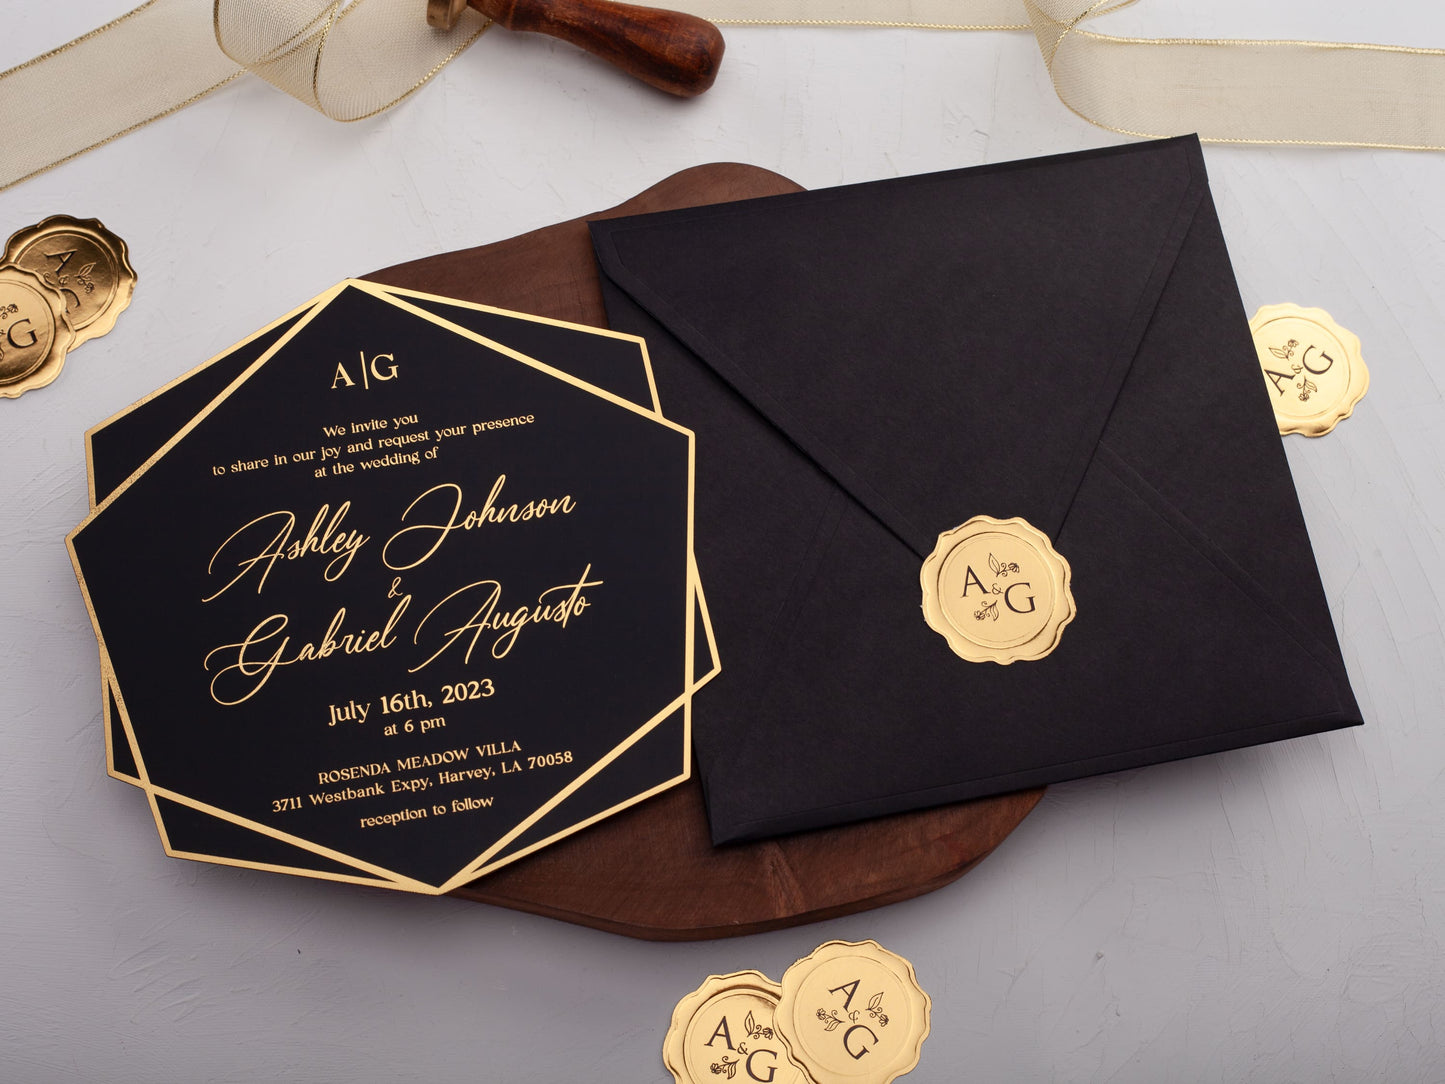 Black Acrylic Wedding Invite with Gold Foil Letters